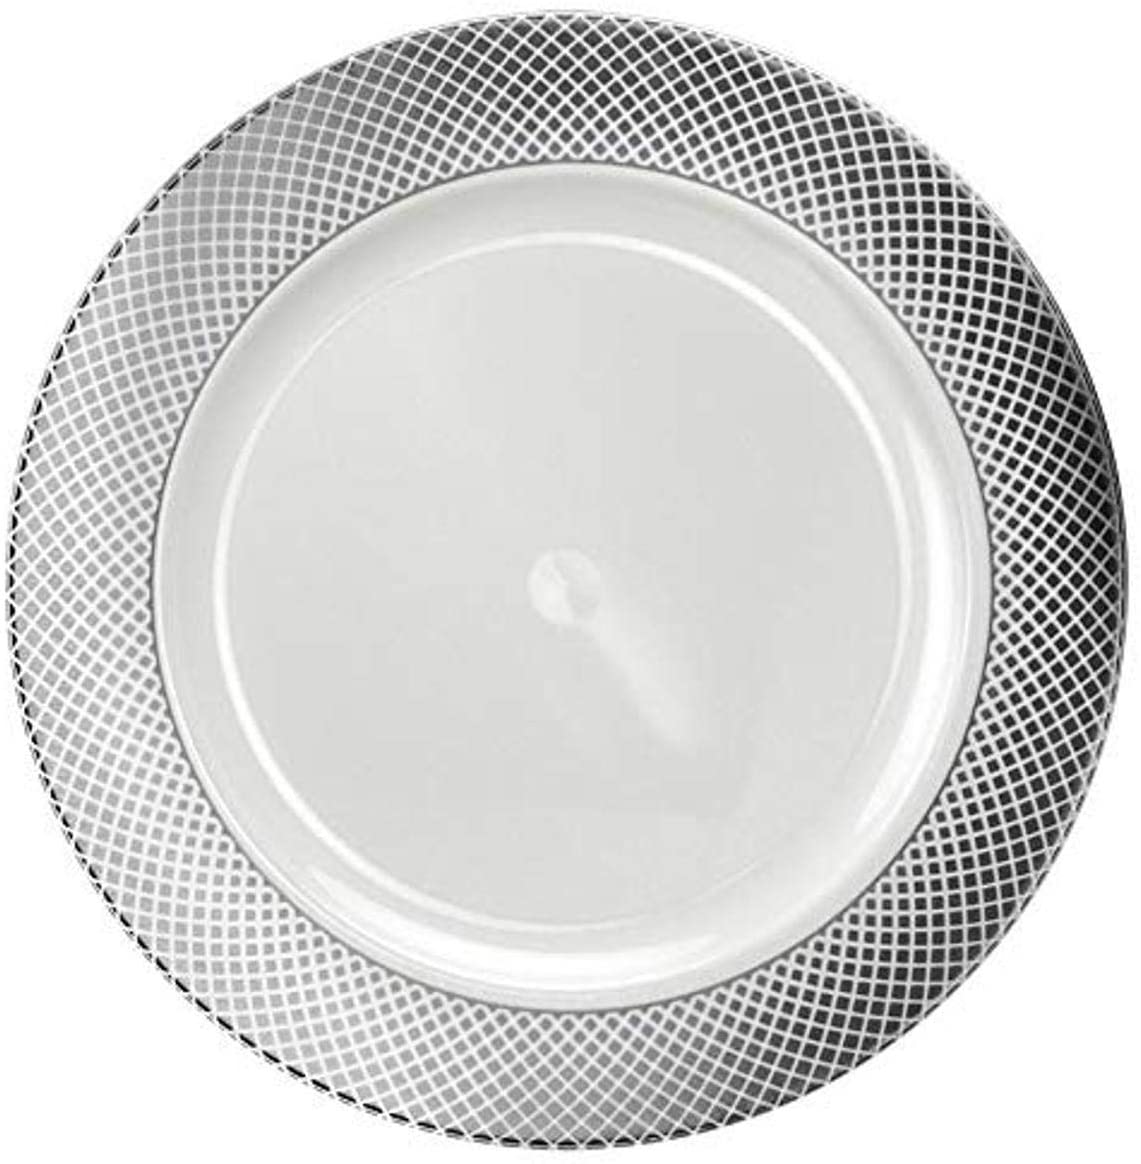 Lillian Collection Plastic Plates- 12″ Silver Magnificence Plate Chargers Pack of 10, black